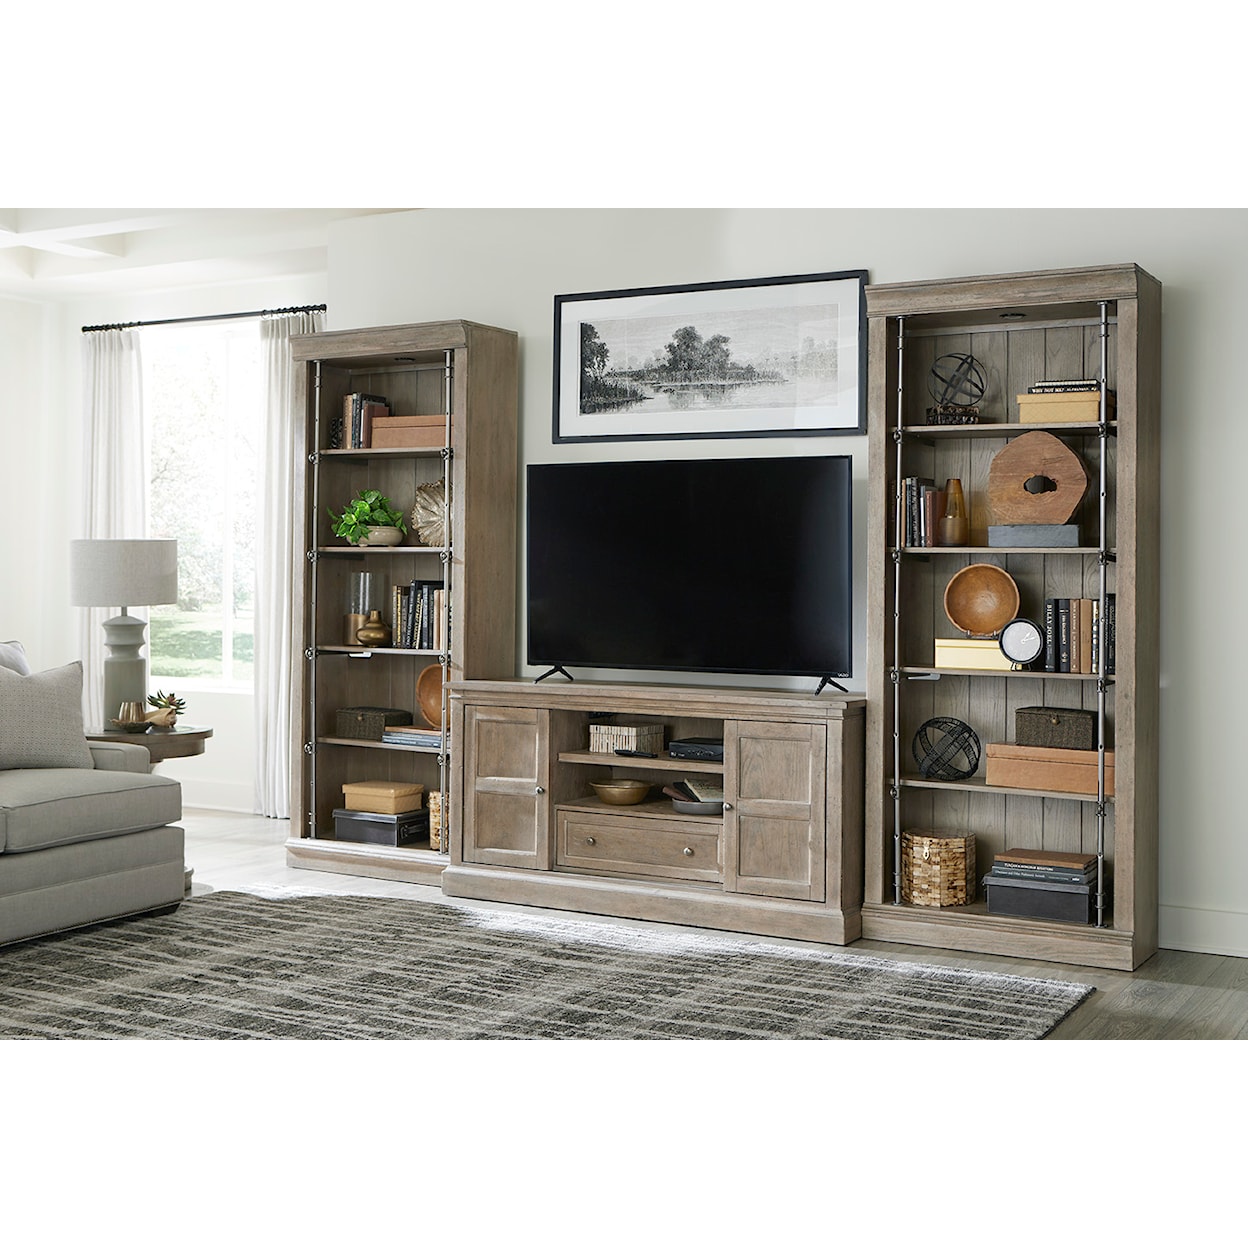 Hammary Donelson Media Console and Bookcases